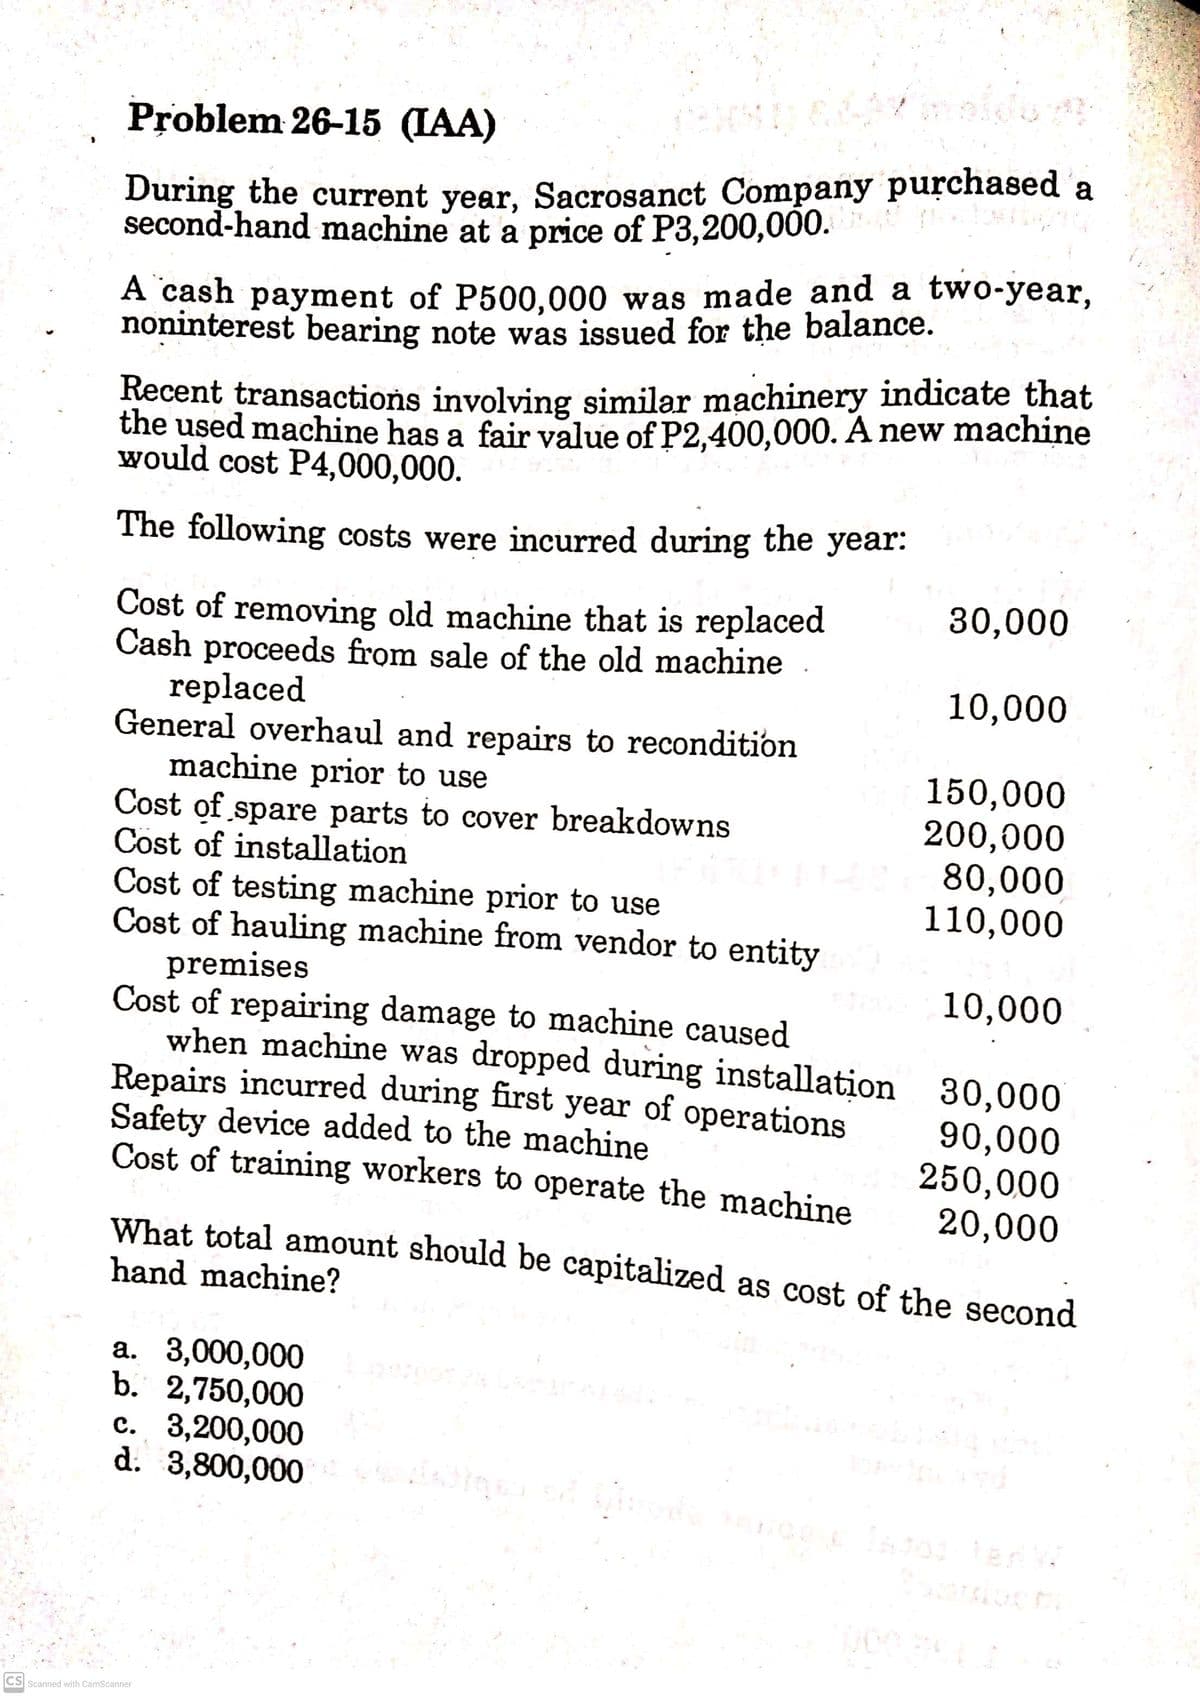 Problem 26-15 (IAA)
During the current year, Sacrosanct Company purchased a
second-hand machine at a price of P3,200,000.
A cash payment of P500,000 was made and a two-year,
noninterest bearing note was issued for the balance.
Recent transactions involving similar machinery indicate that
the used machine has a fair value of P2,400,000. A new machine
would cost P4,000,000.
The following costs were incurred during the year:
30,000
Cost of removing old machine that is replaced
Cash proceeds from sale of the old machine
replaced
General overhaul and repairs to recondition
machine prior to use
Cost of spare parts to cover breakdowns
Cost of installation
Cost of testing machine prior to use
Cost of hauling machine from vendor to entity
premises
Cost of repairing damage to machine caused
when machine was dropped during installation 30,000
Repairs incurred during first year of operations
Safety device added to the machine
Cost of training workers to operate the machine
10,000
150,000
200,000
80,000
110,000
10,000
90,000
250,000
20,000
What total amount should be capitalized as cost of the second
hand machine?
а. 3,000,000
b. 2,750,000
c. 3,200,000
d. 3,800,000
CS Scanned with CamScanner
